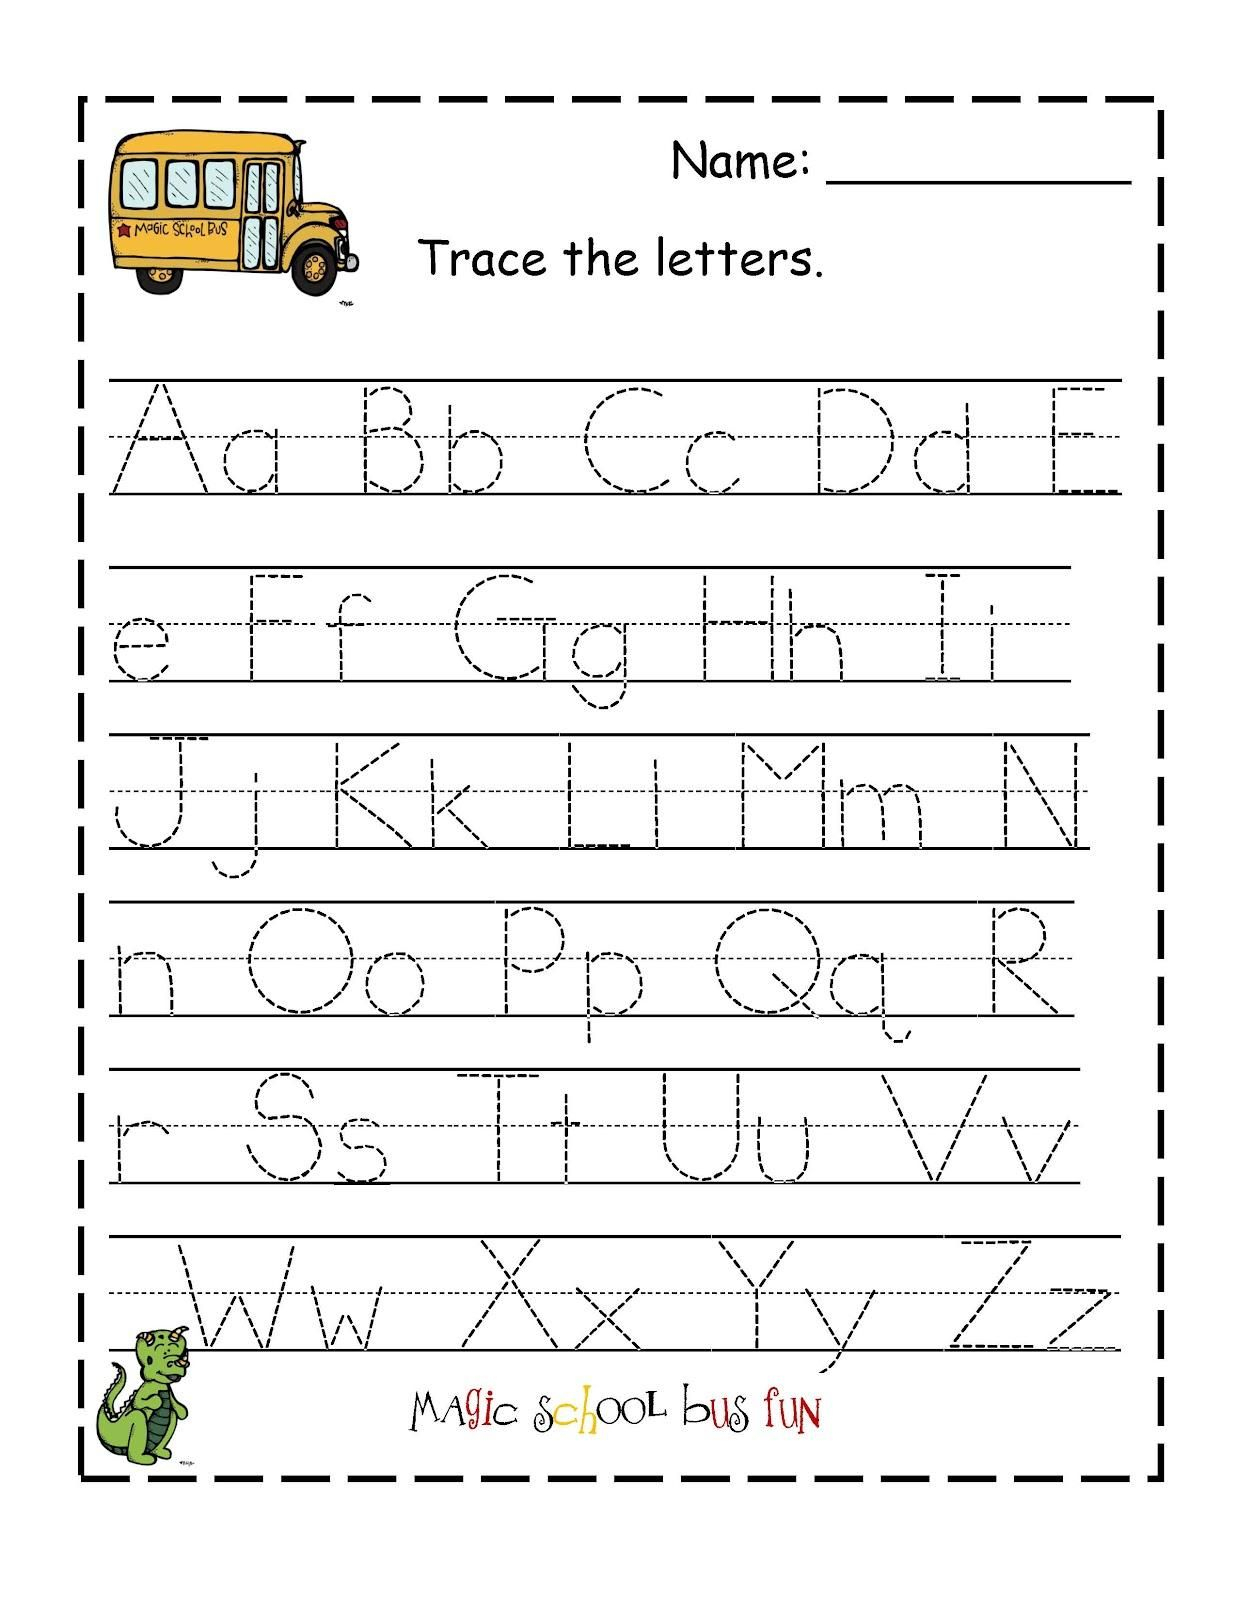 Coloring Book : Printable Letter Tracing Sheets For throughout Letter Tracing Worksheets For Preschoolers Free